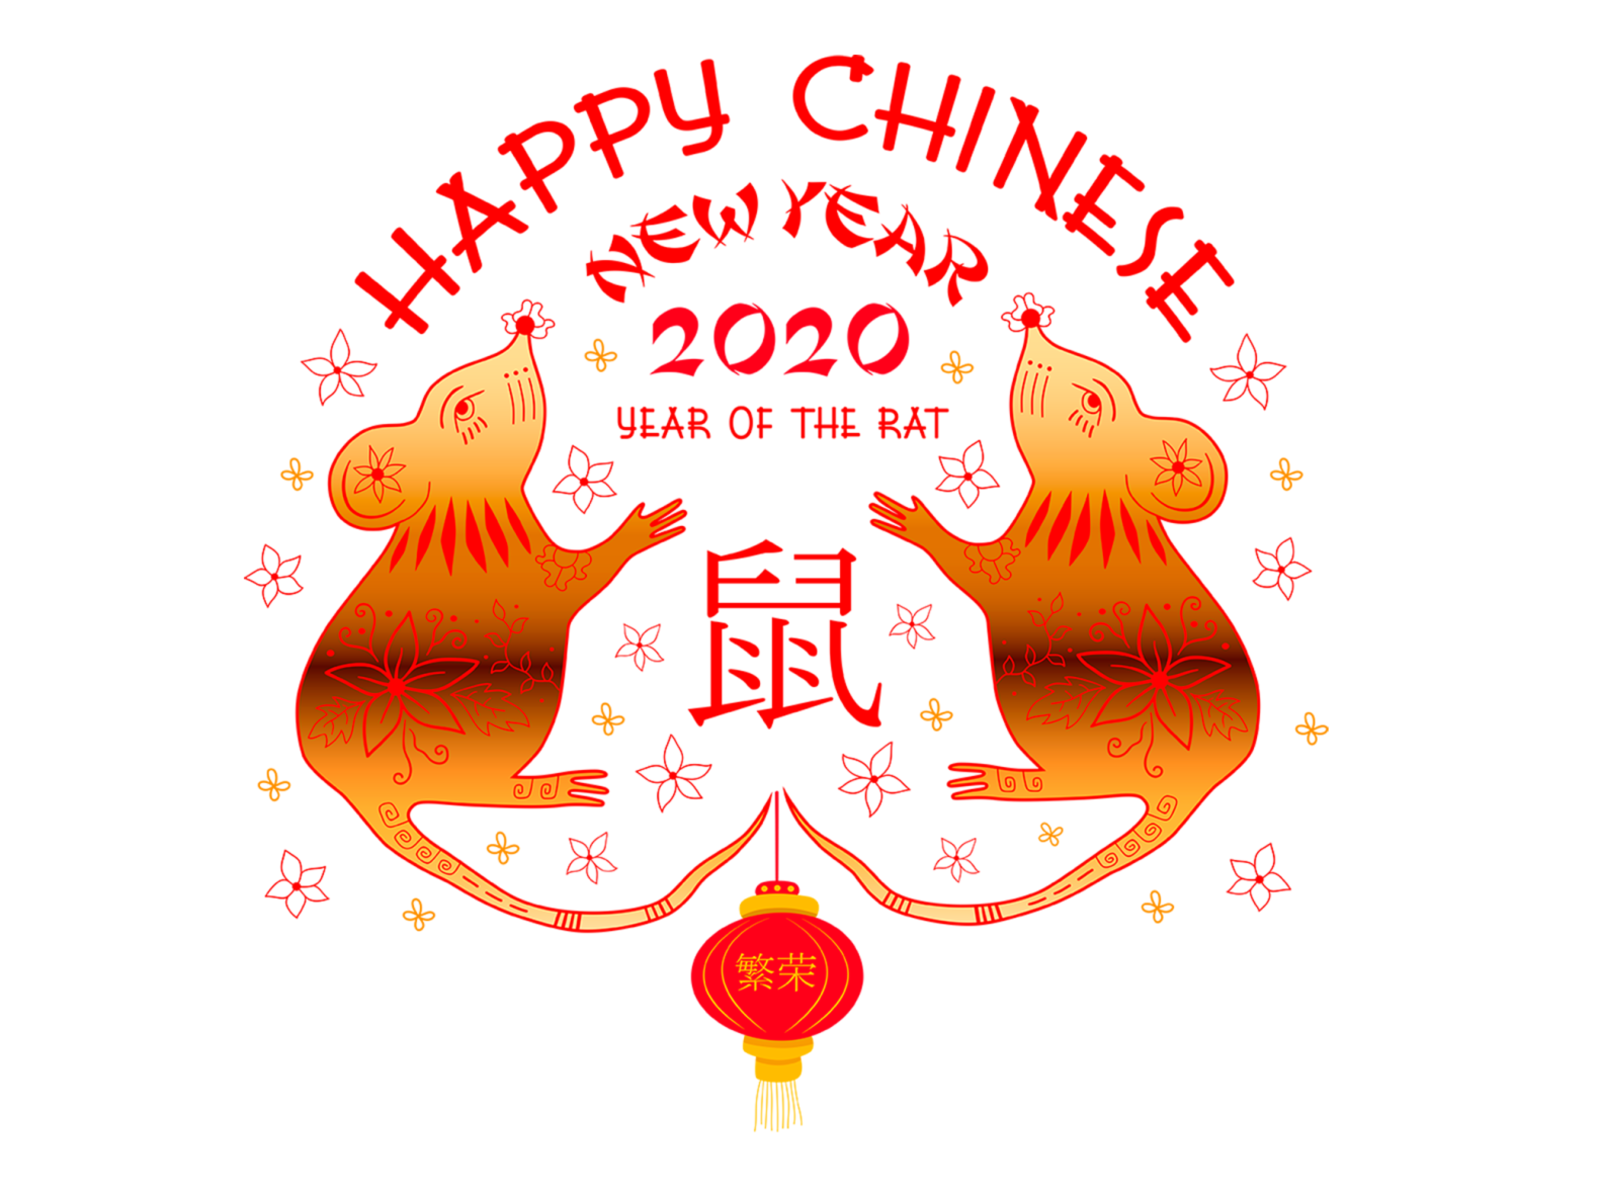 Happy Chinese New Year 2020 Png - Best Season Ideas1600 x 1200